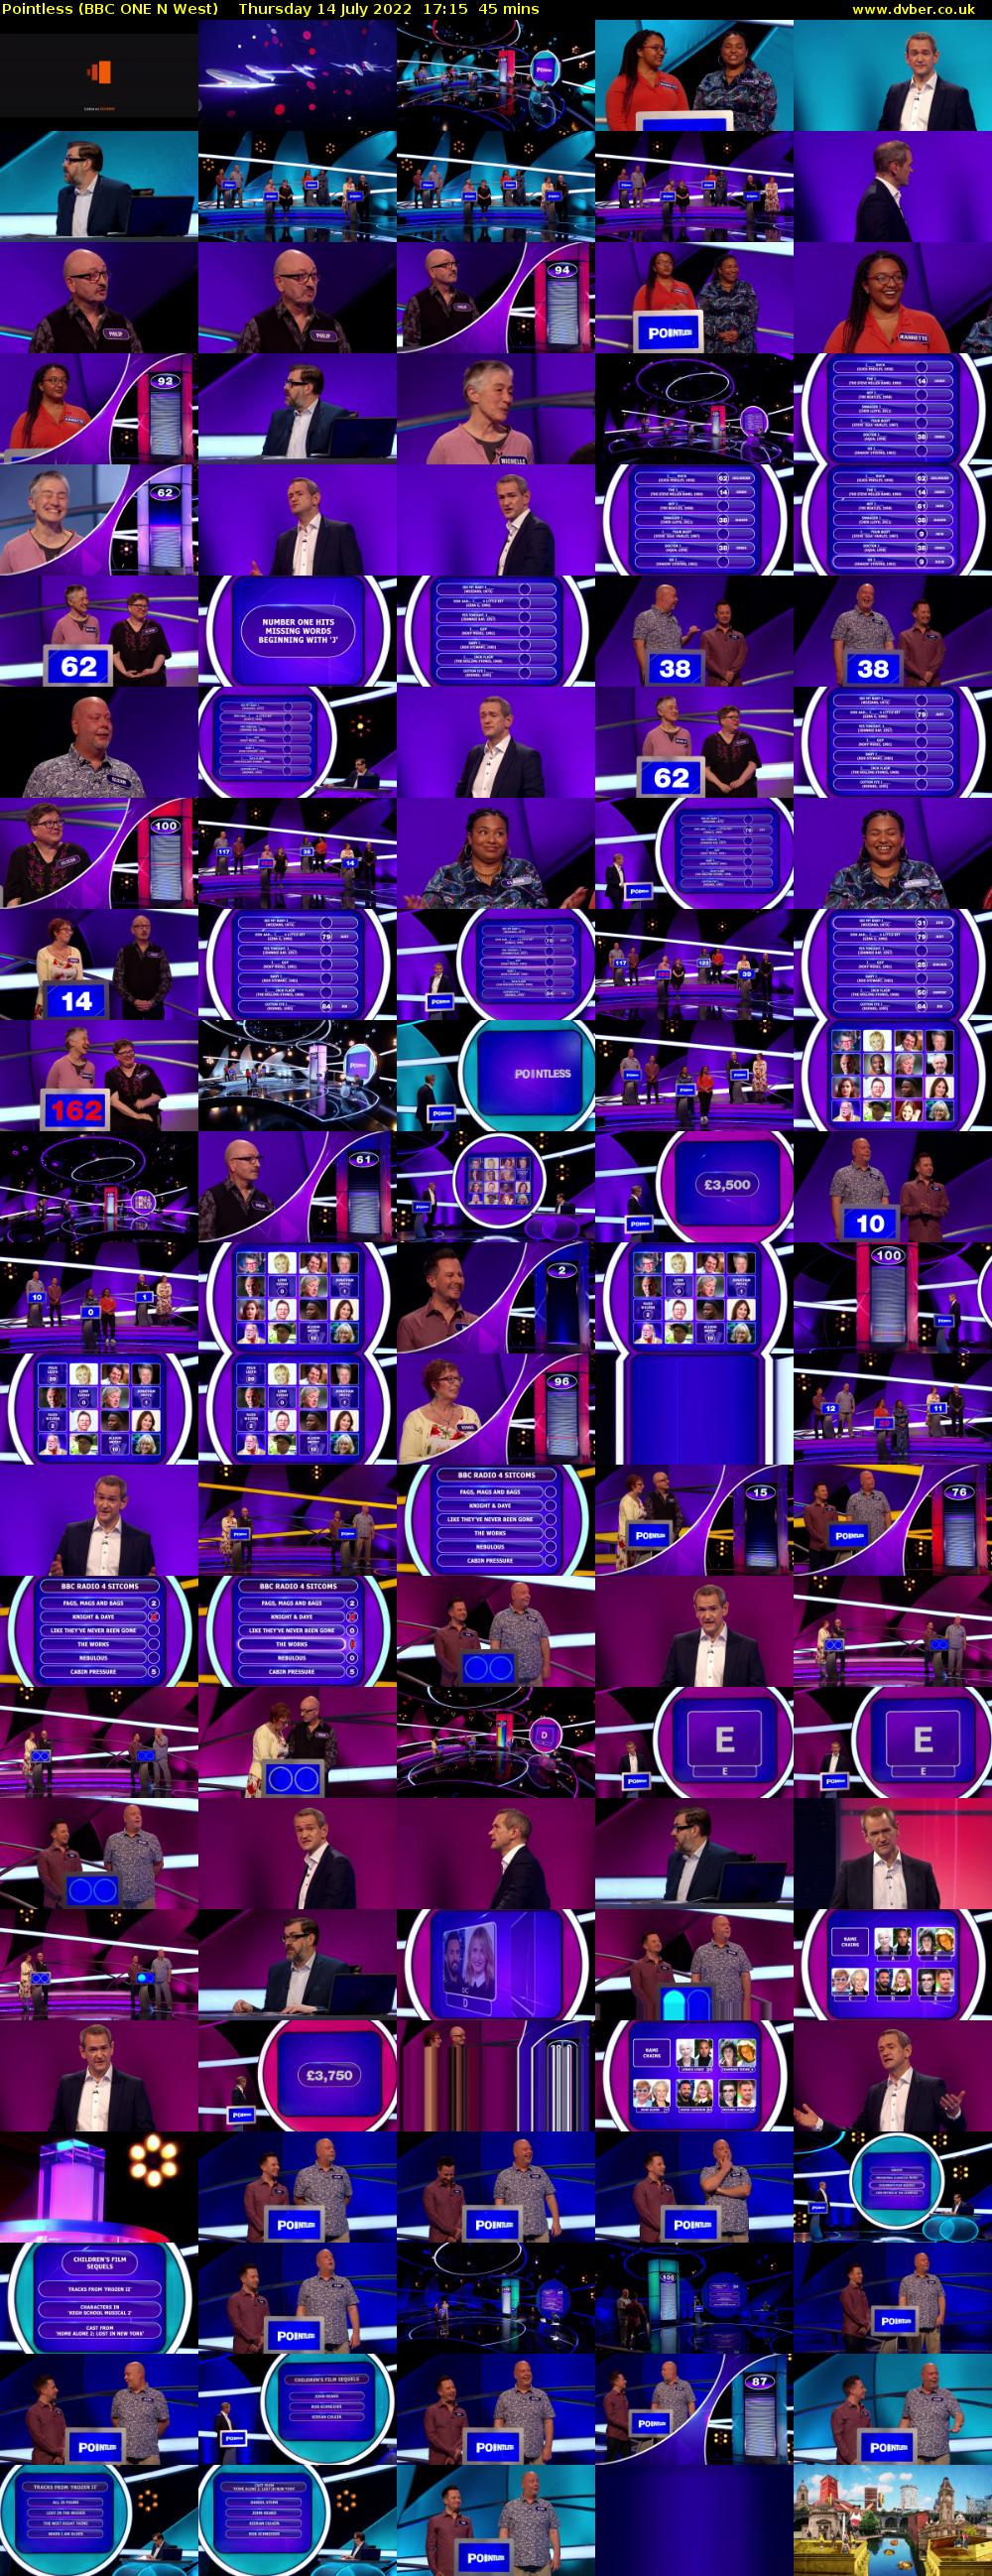 Pointless (BBC ONE N West) Thursday 14 July 2022 17:15 - 18:00